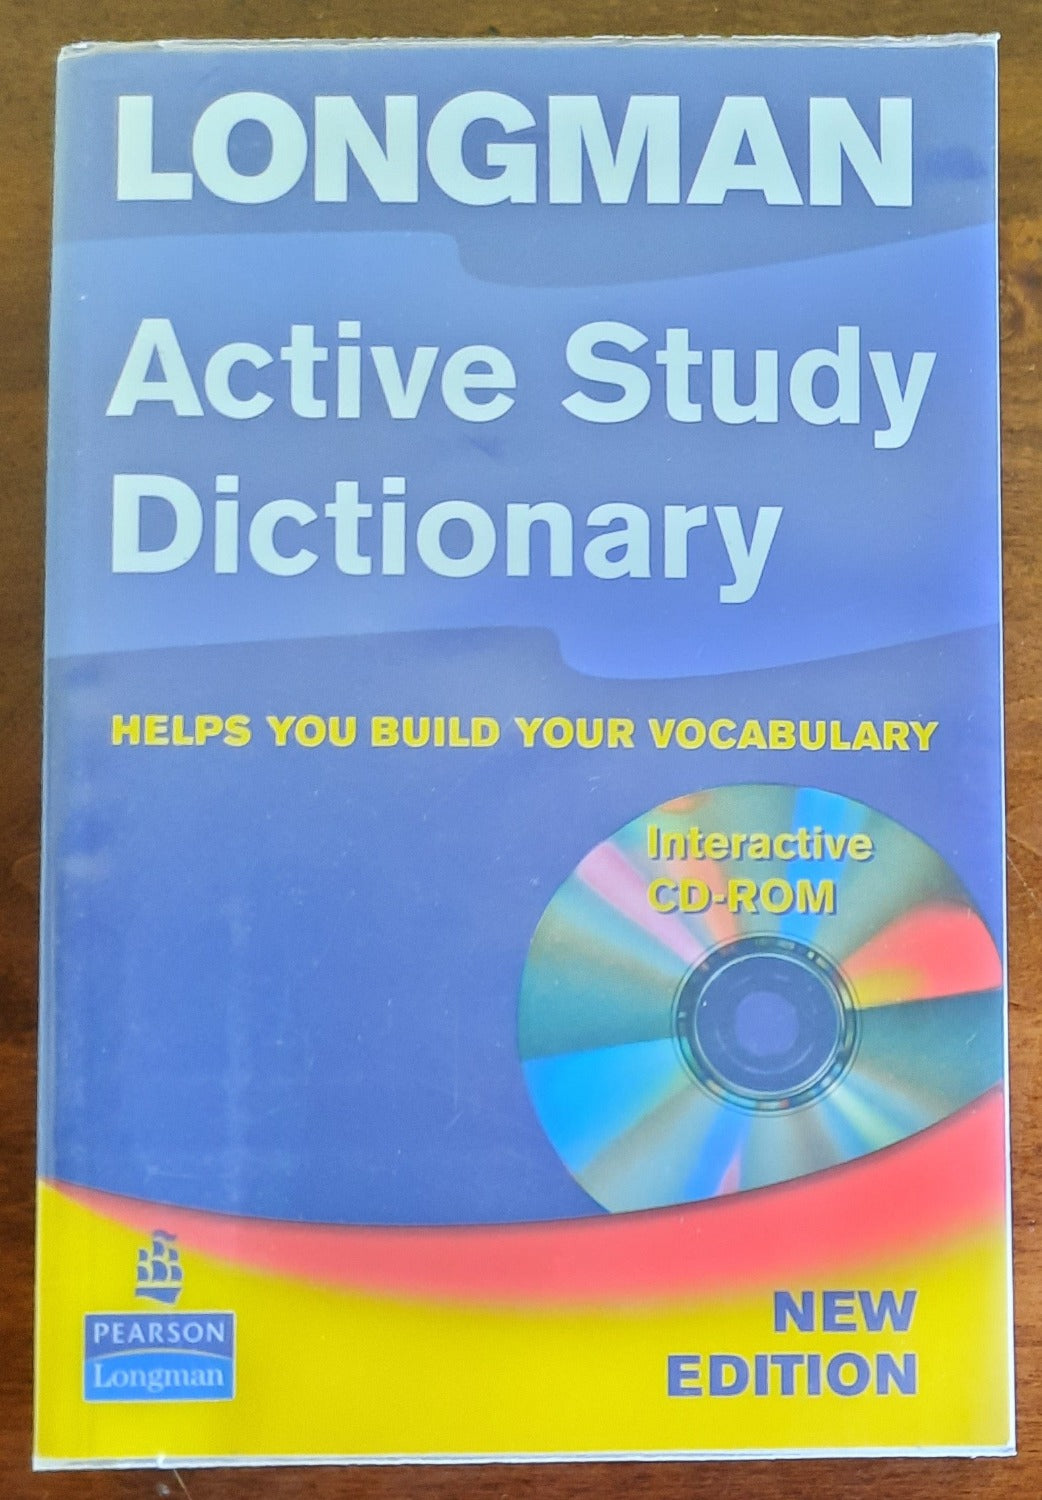 Libreria　Con　–　active　dictionary　with　CD-ROM　thesaurus.　integrated　study　Longman　Biellese